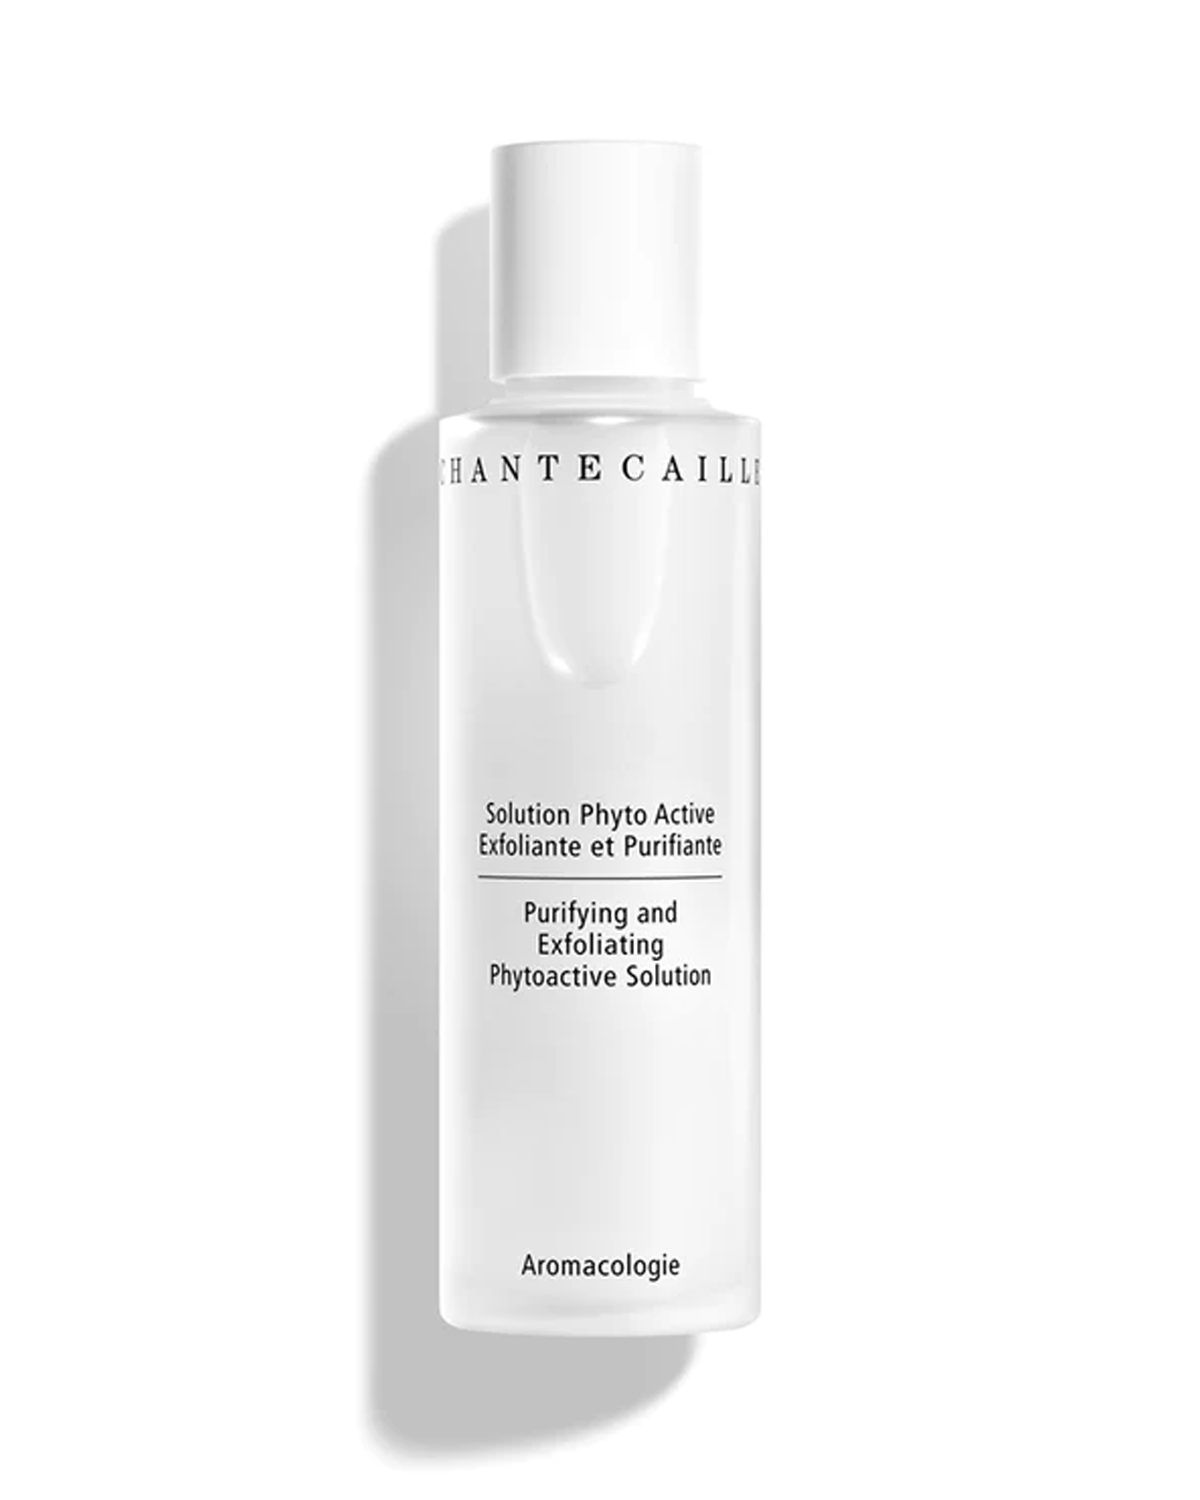 Purifying and exfoliating Phytoactive Solution